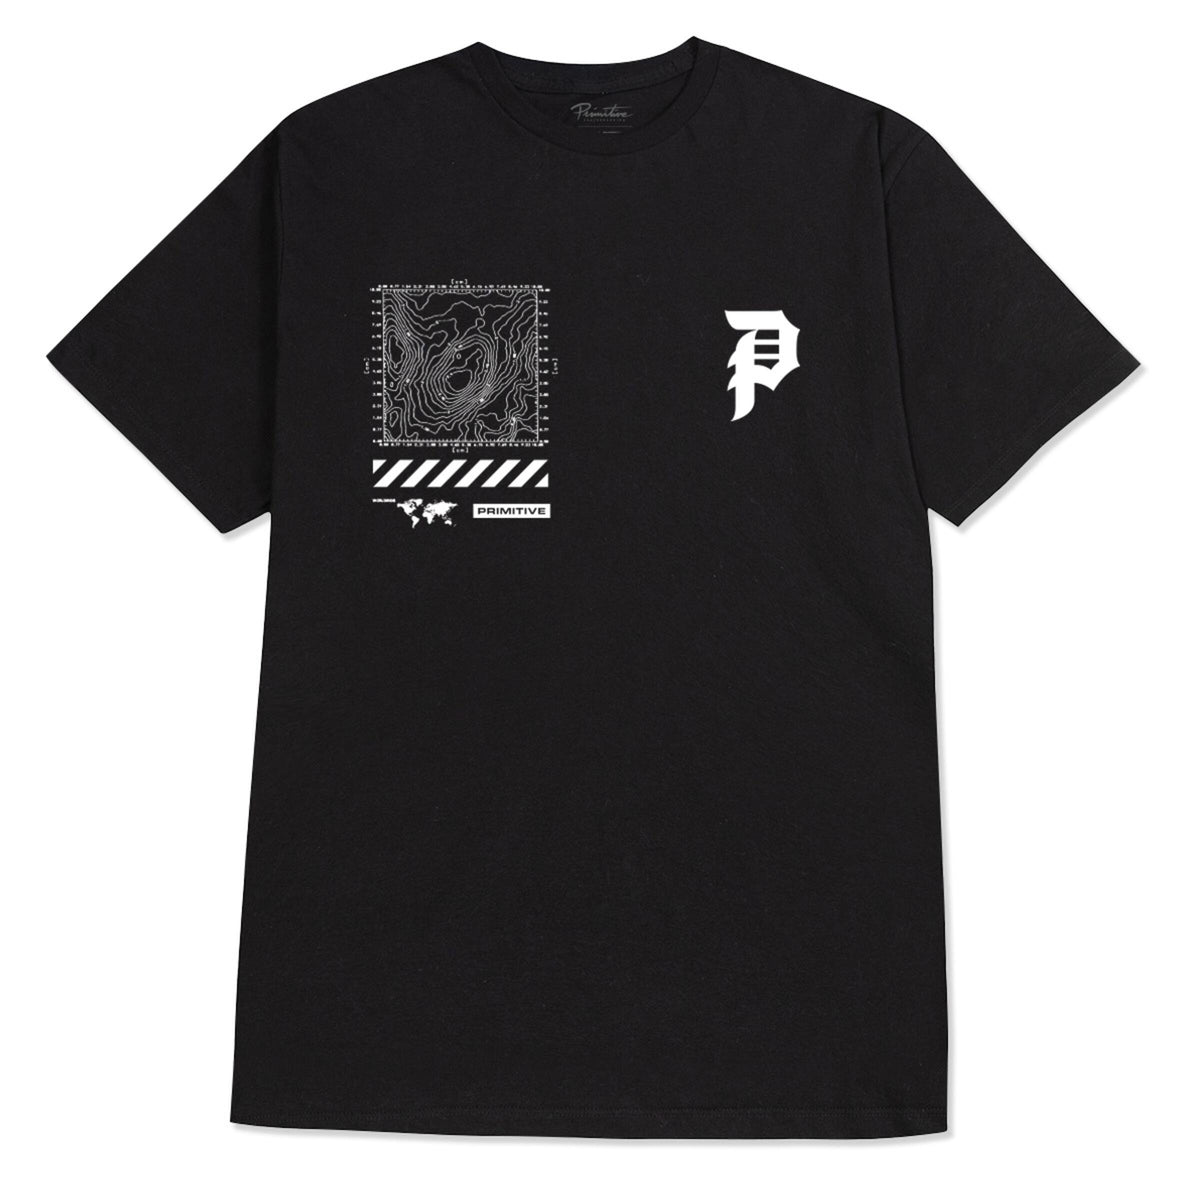 Primitive x Call of Duty Mapping Dirty P Tee